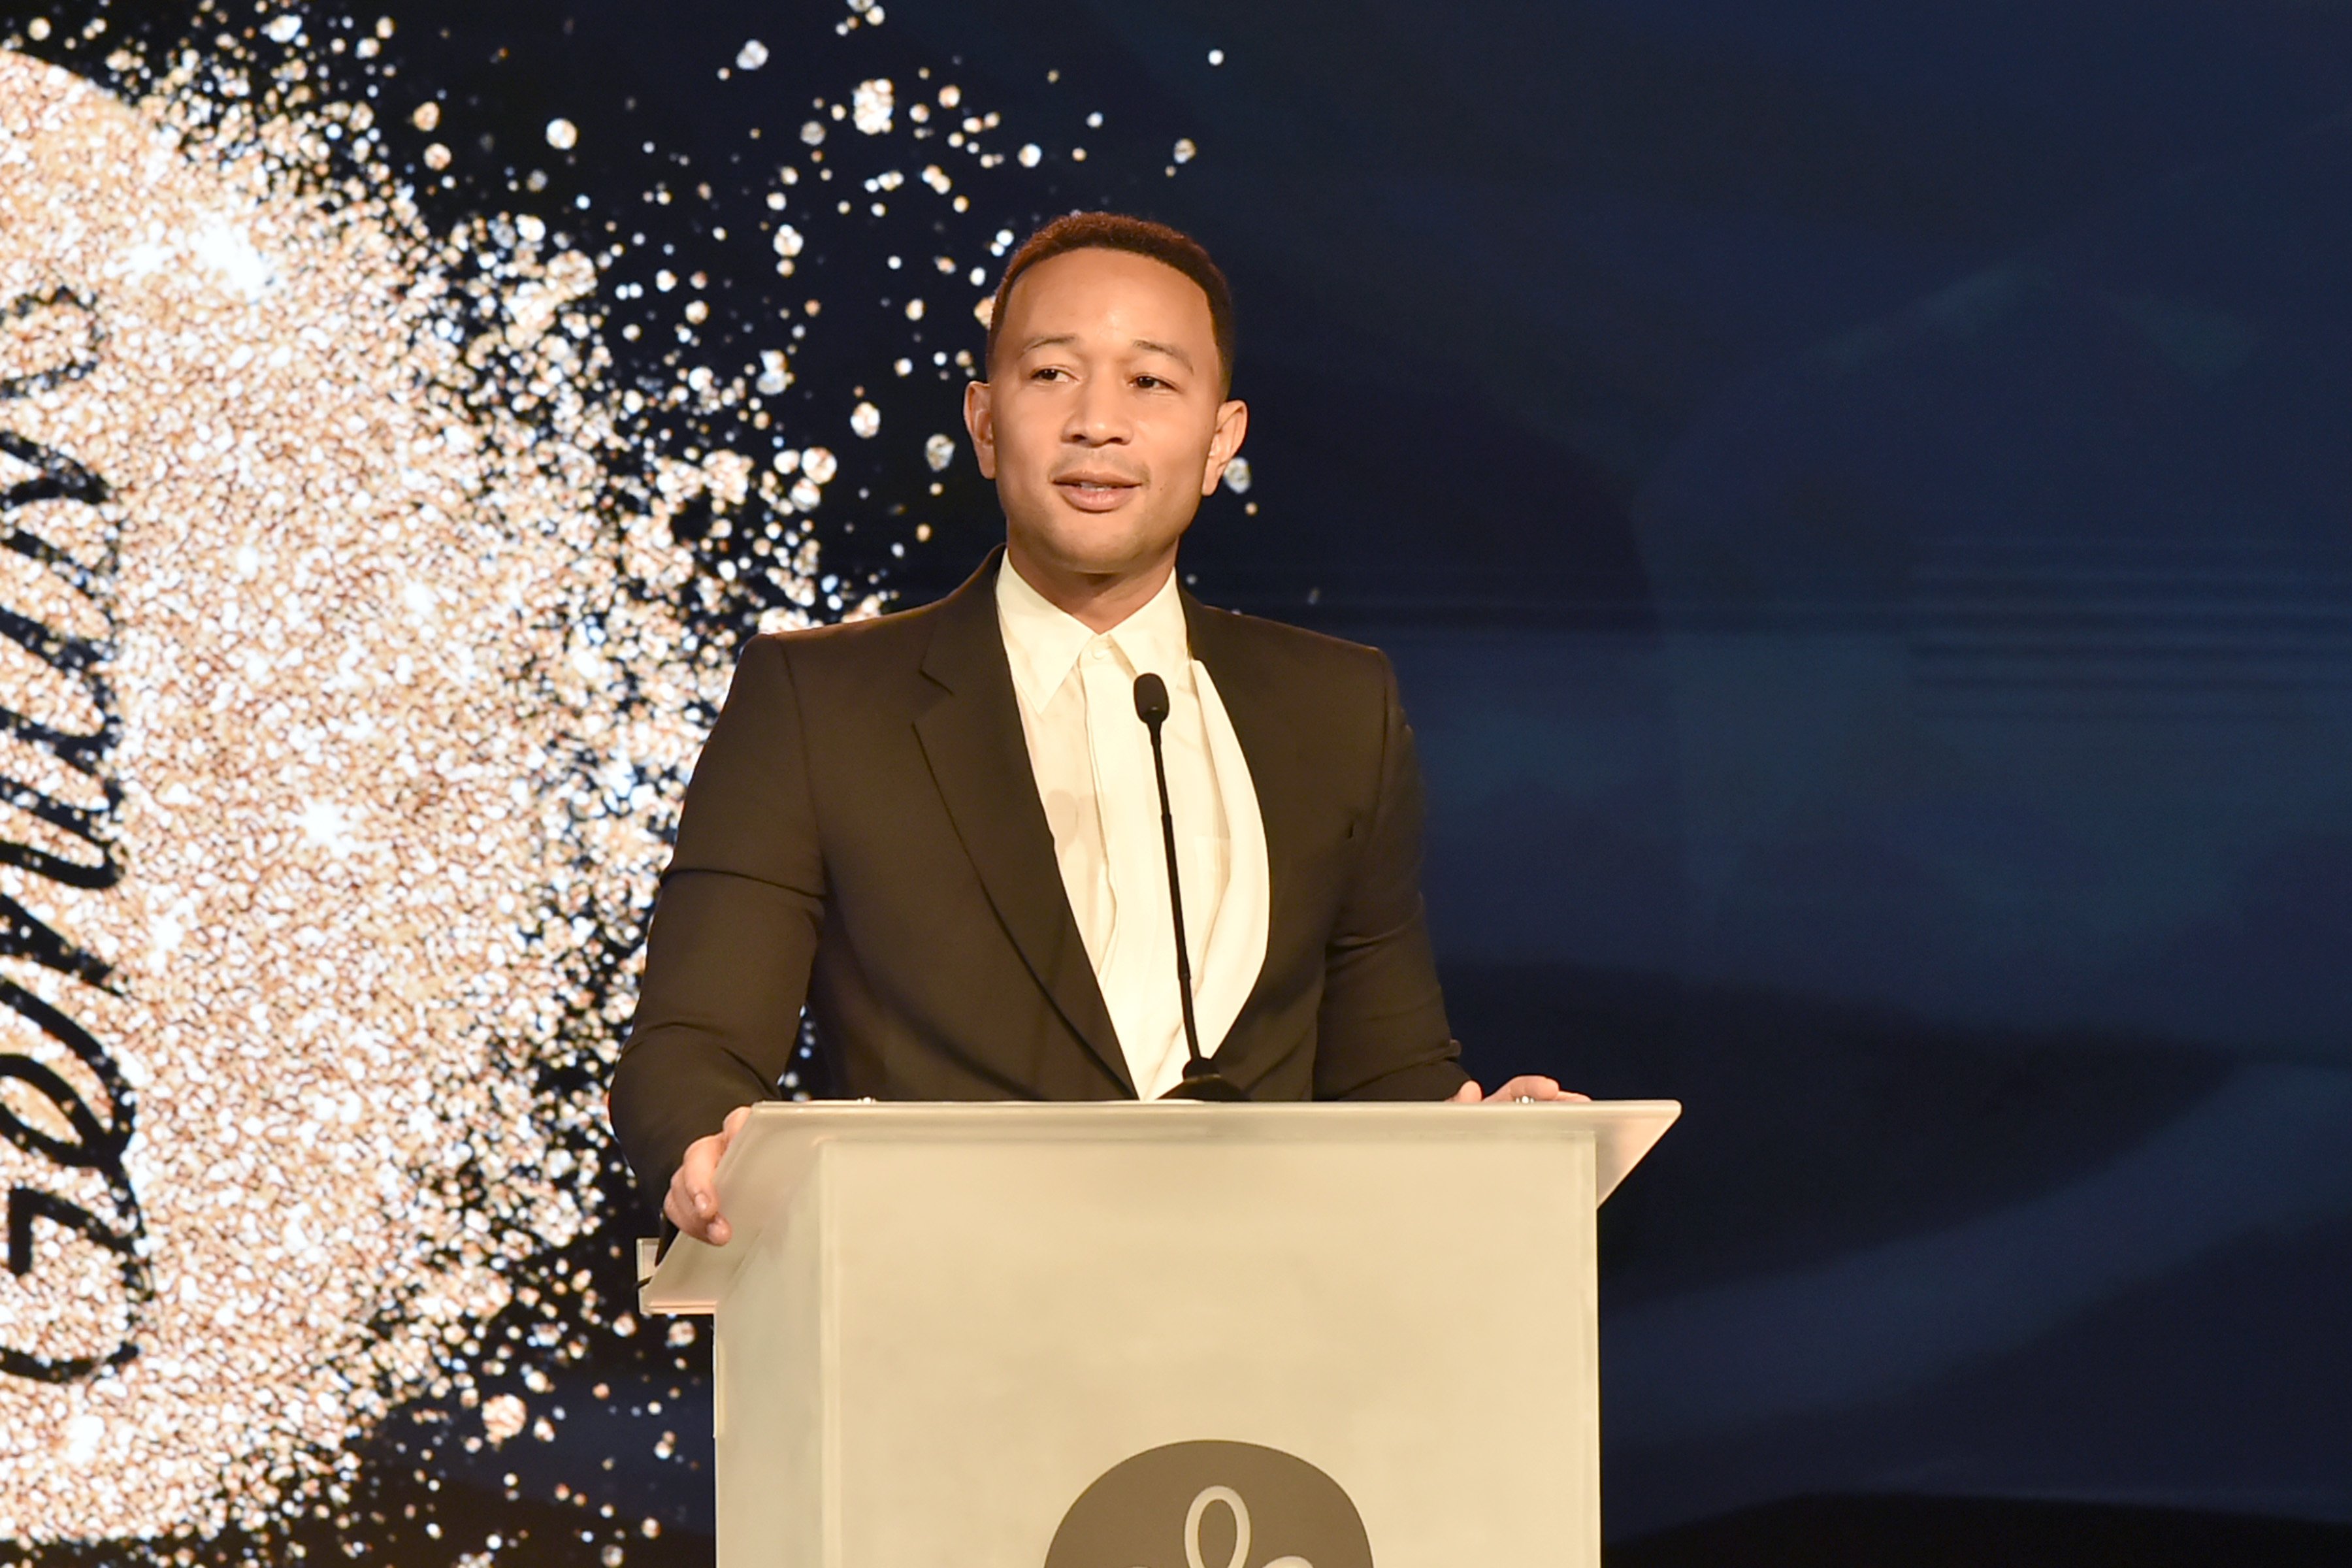 John Legend on November 04, 2019 in Palm Springs, California | Photo: Getty Images